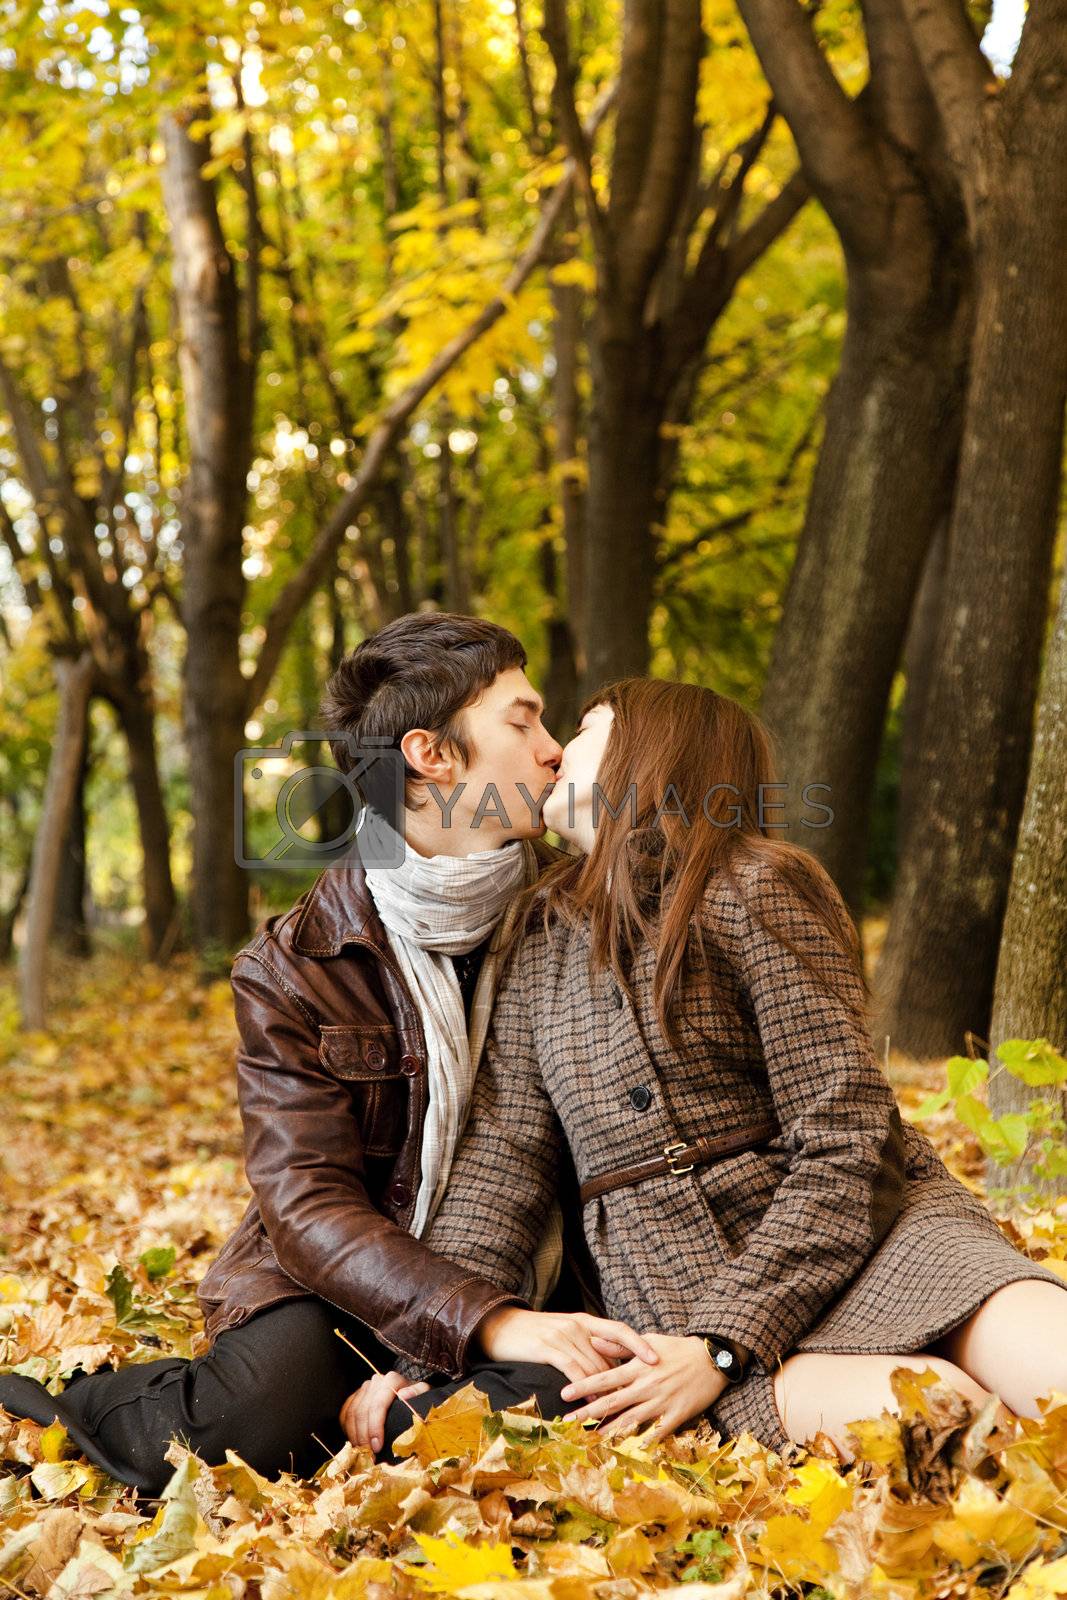 Royalty free image of Couple kissing in the park by masson